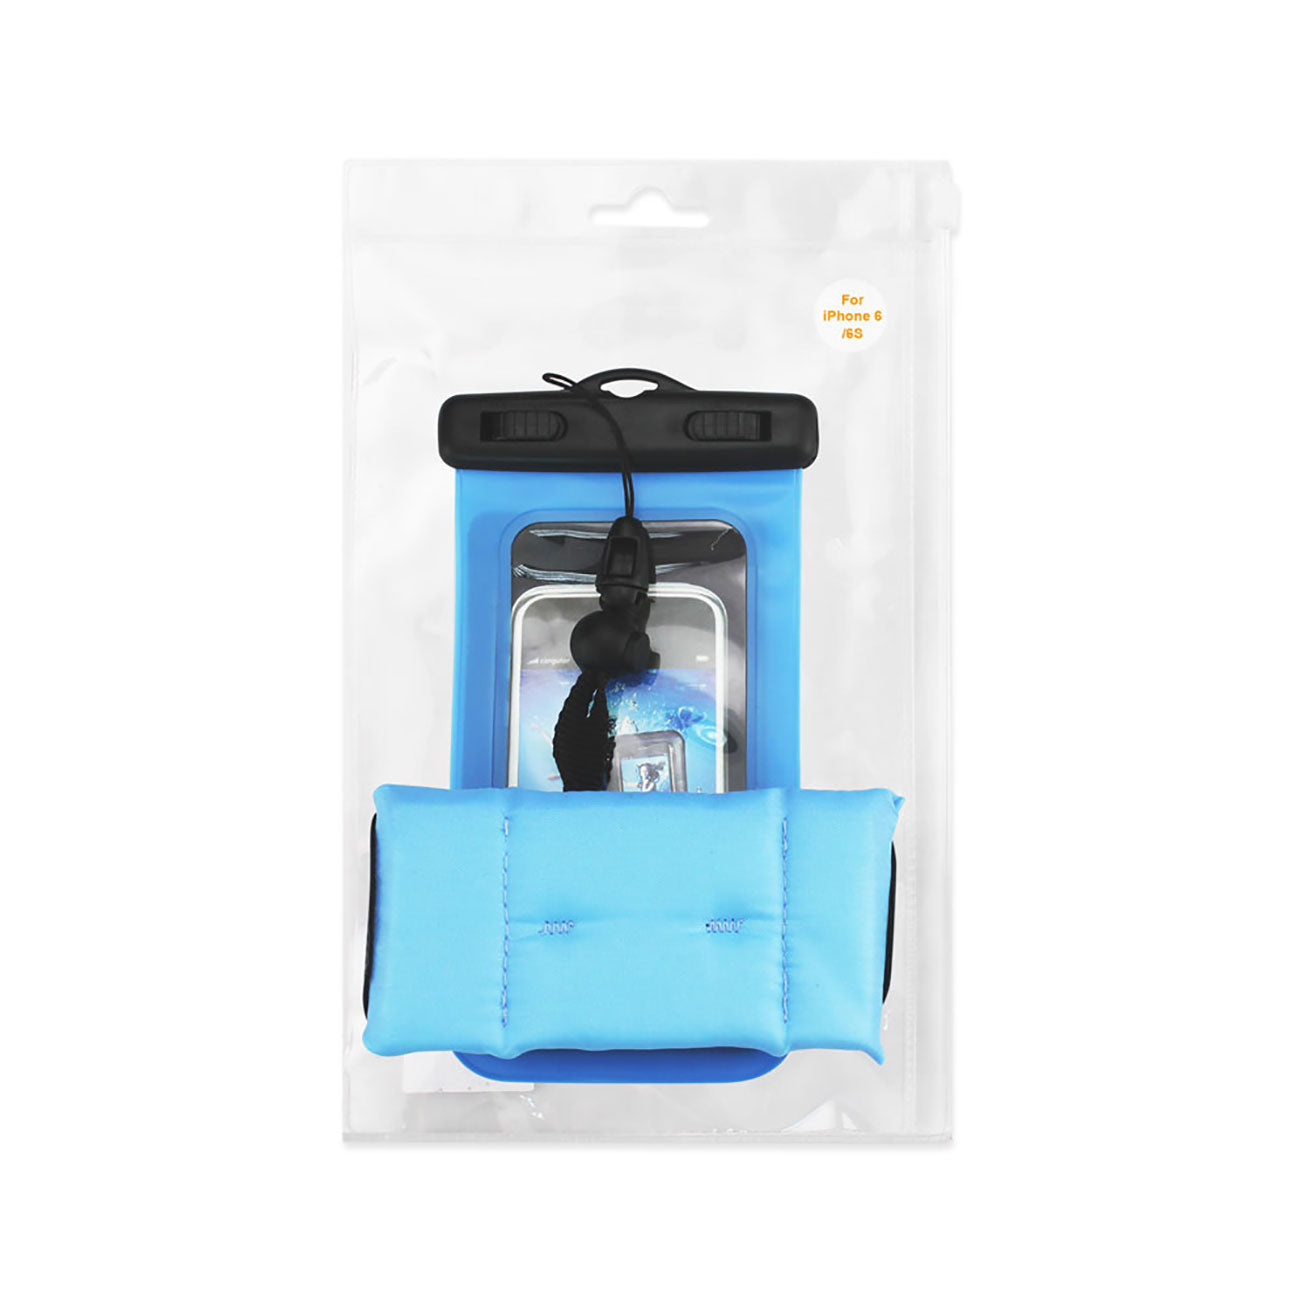 Case Waterproof With Touch Screen Floating Adjustable Wrist Strap For 4.7X2.4X0.4 Inches Devices Blue Color